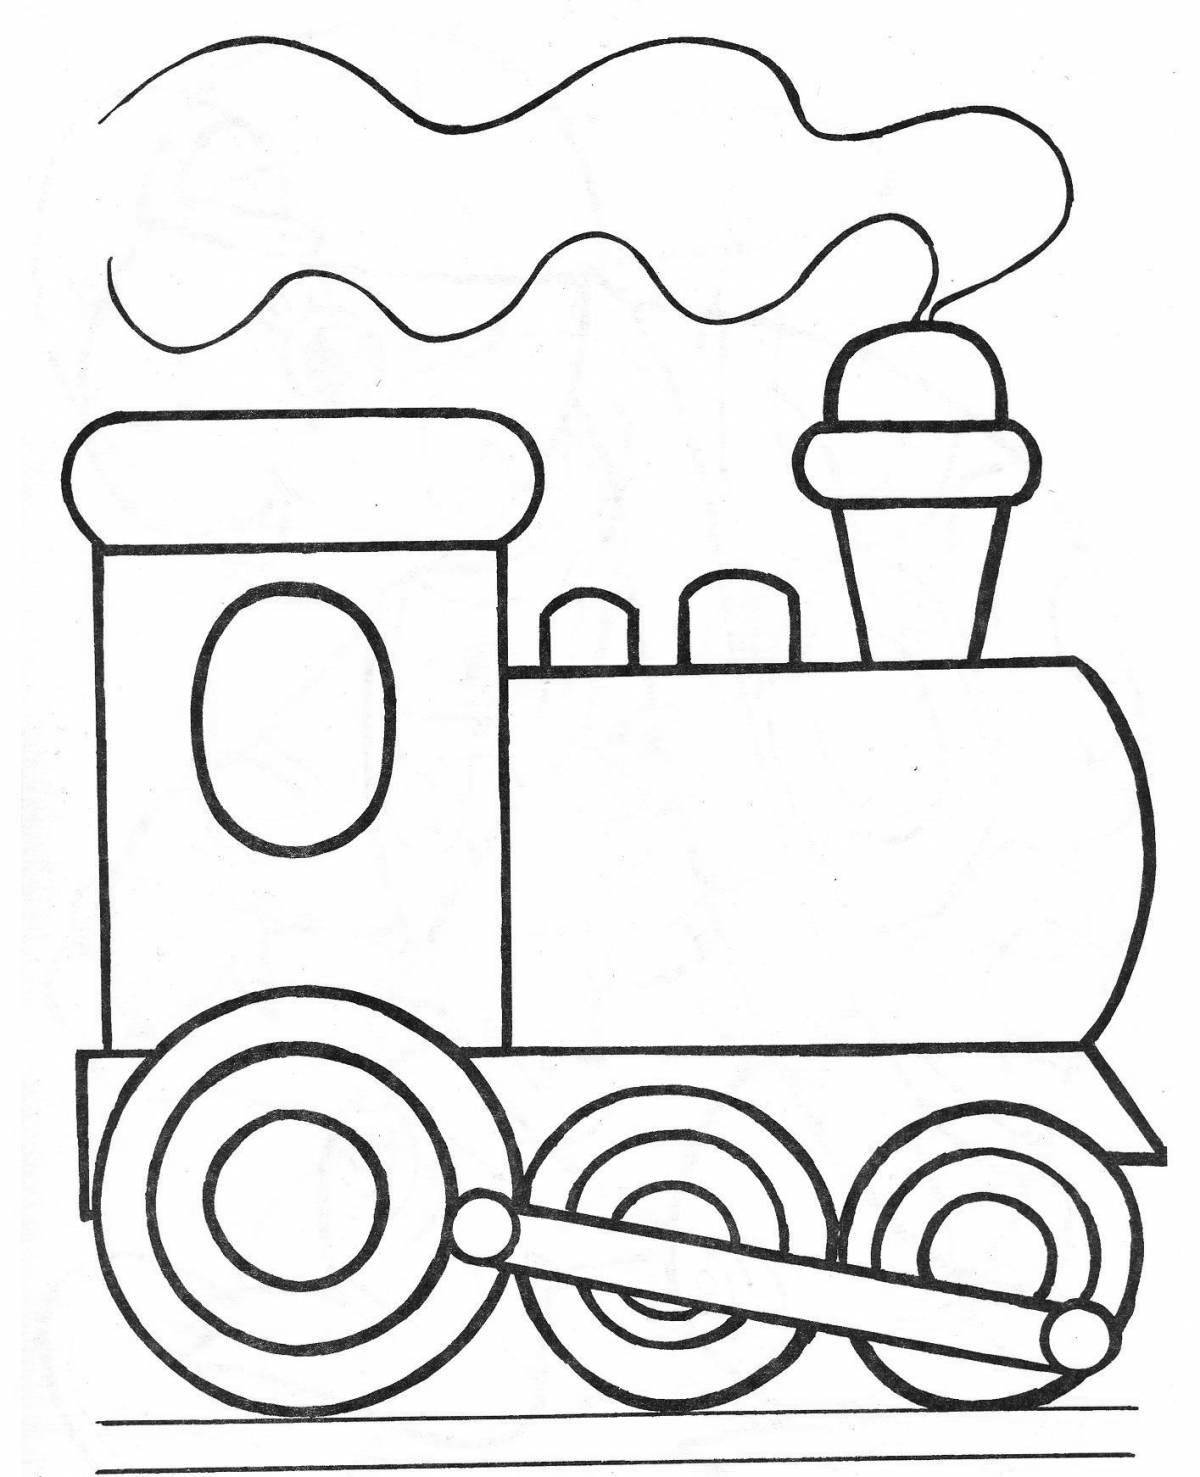 Color-frenzy coloring page for boys 3 years old